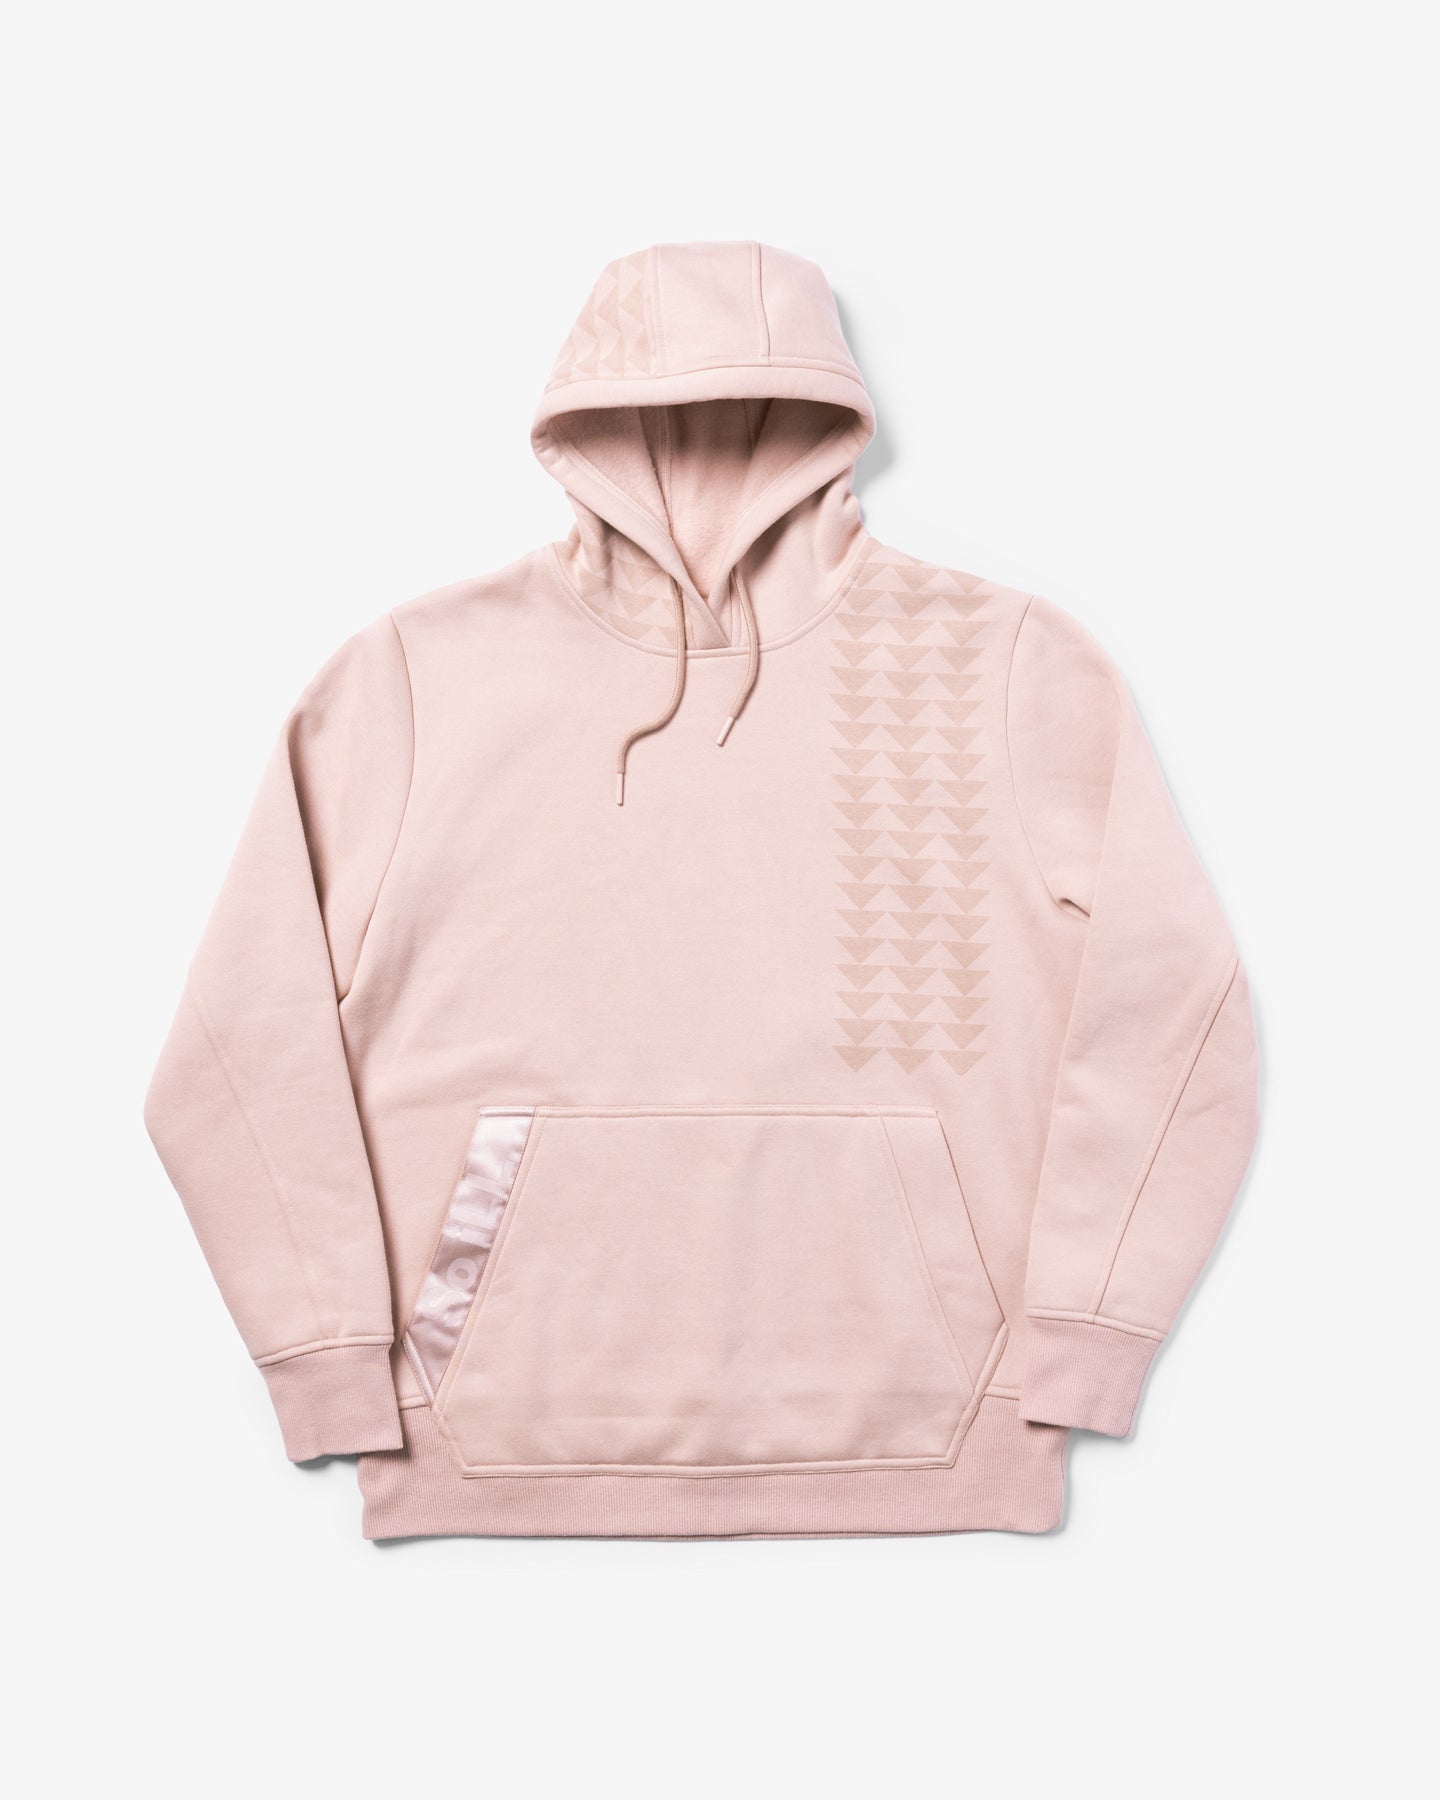 Nakoa Pullover Hoodie - On The Roam • Dirty Pink - XS - So iLL - On The Roam